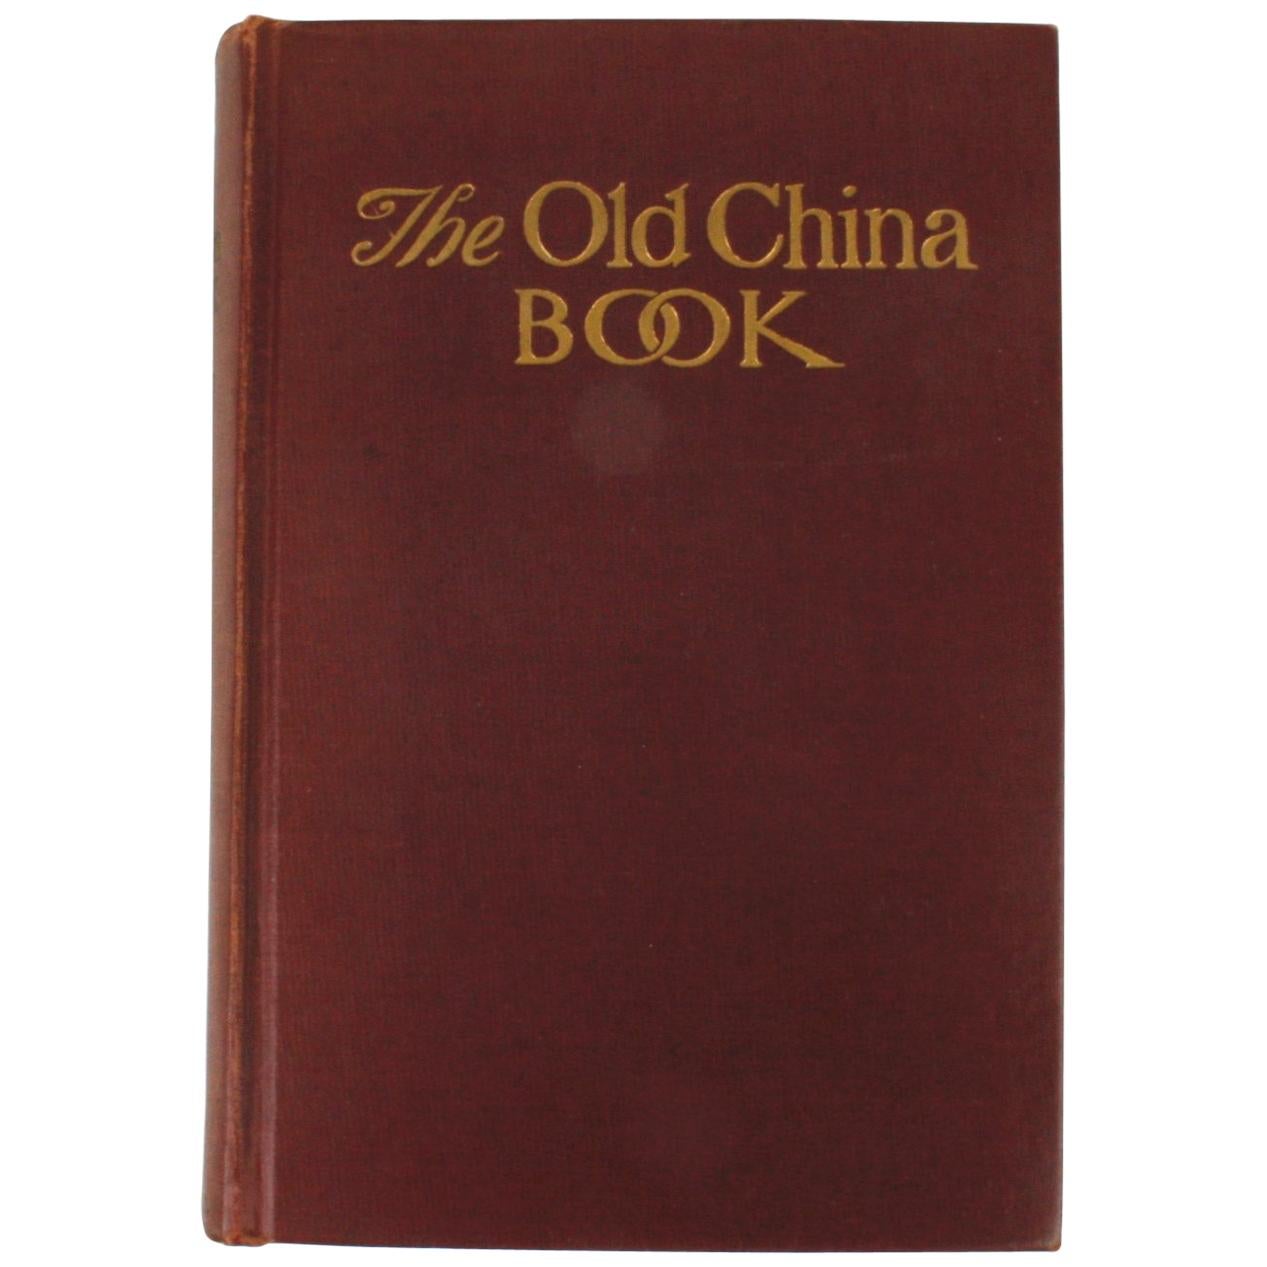 "The Old China Book" by N. Hudson Moore